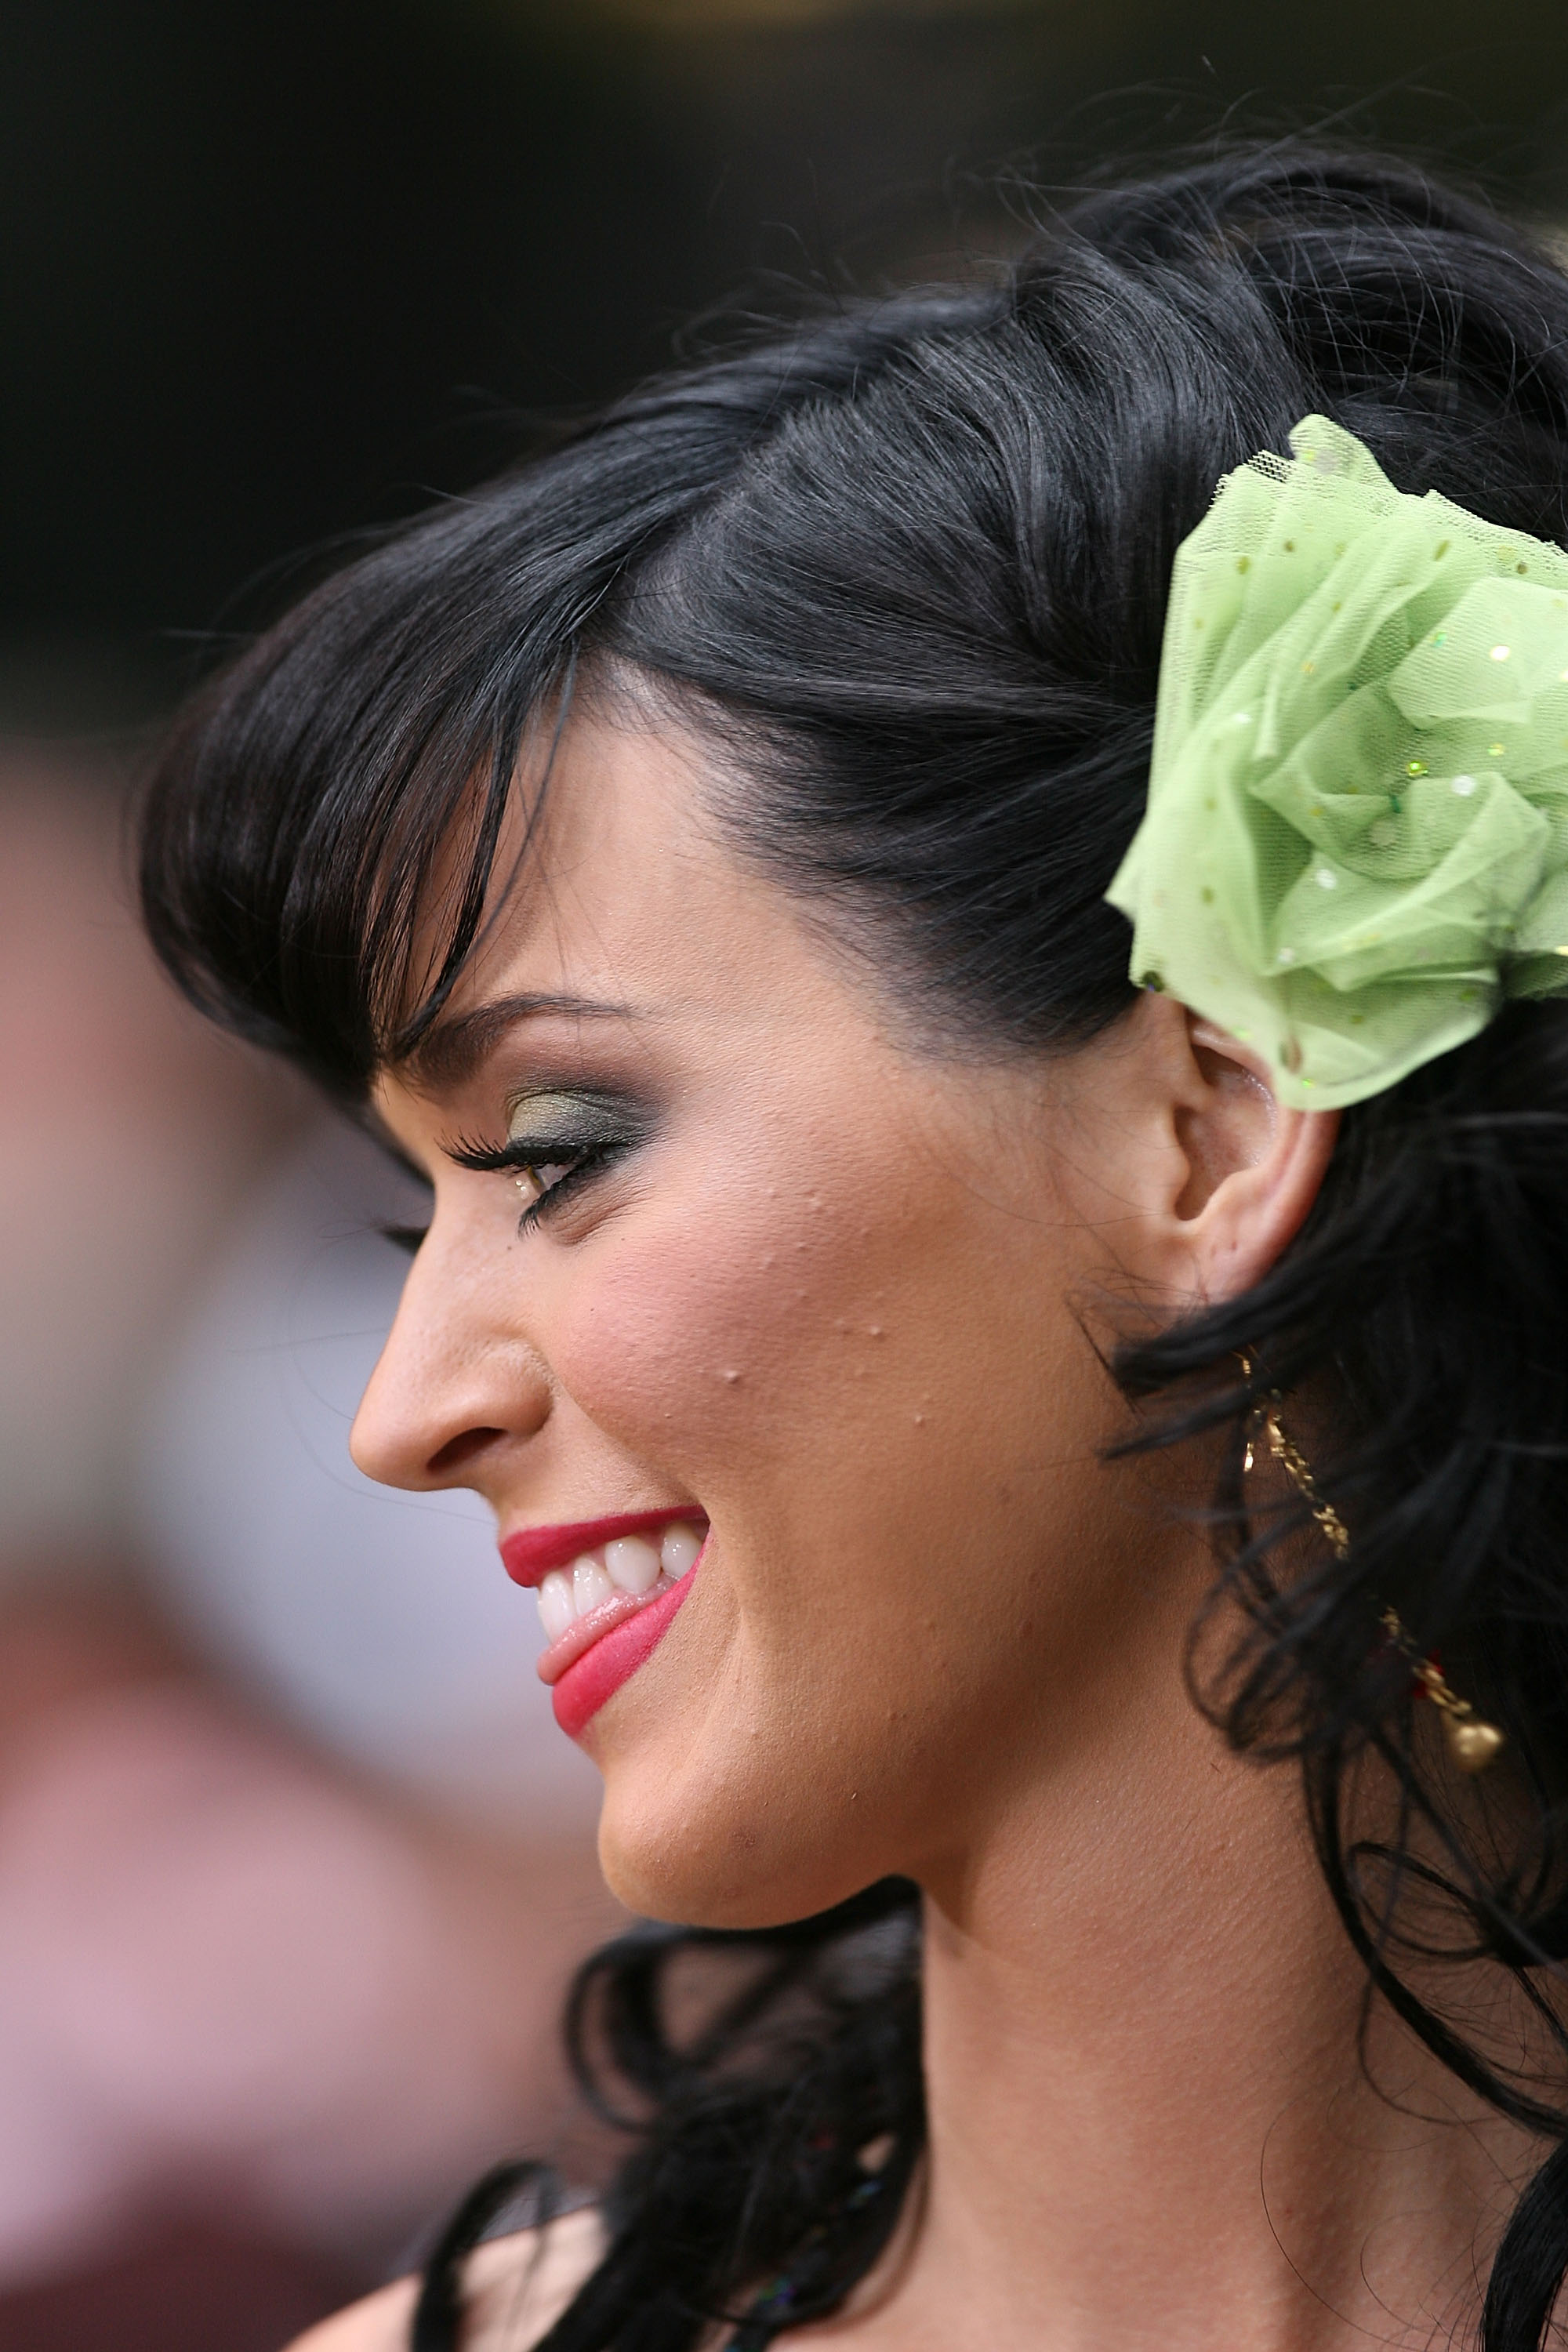 Katy Perry en 2008 | Source : Getty Images